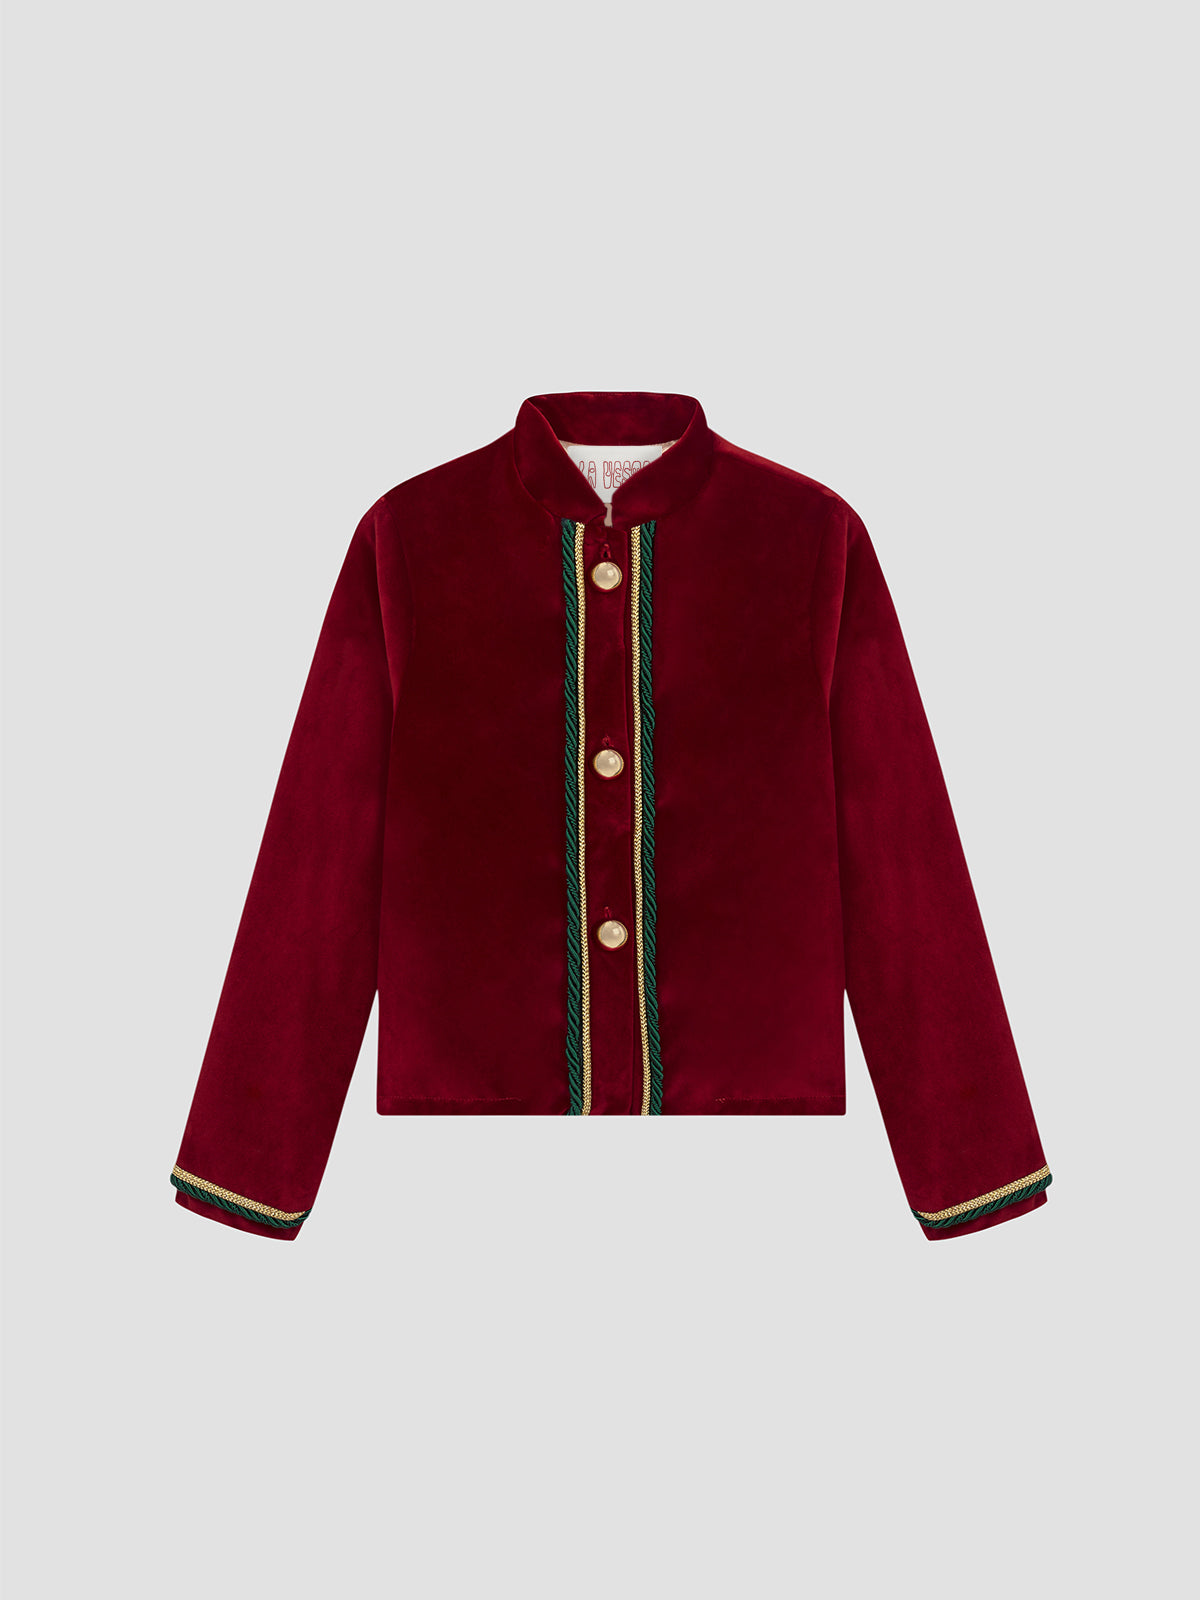 Red velvet jacket with green and gold trimmings